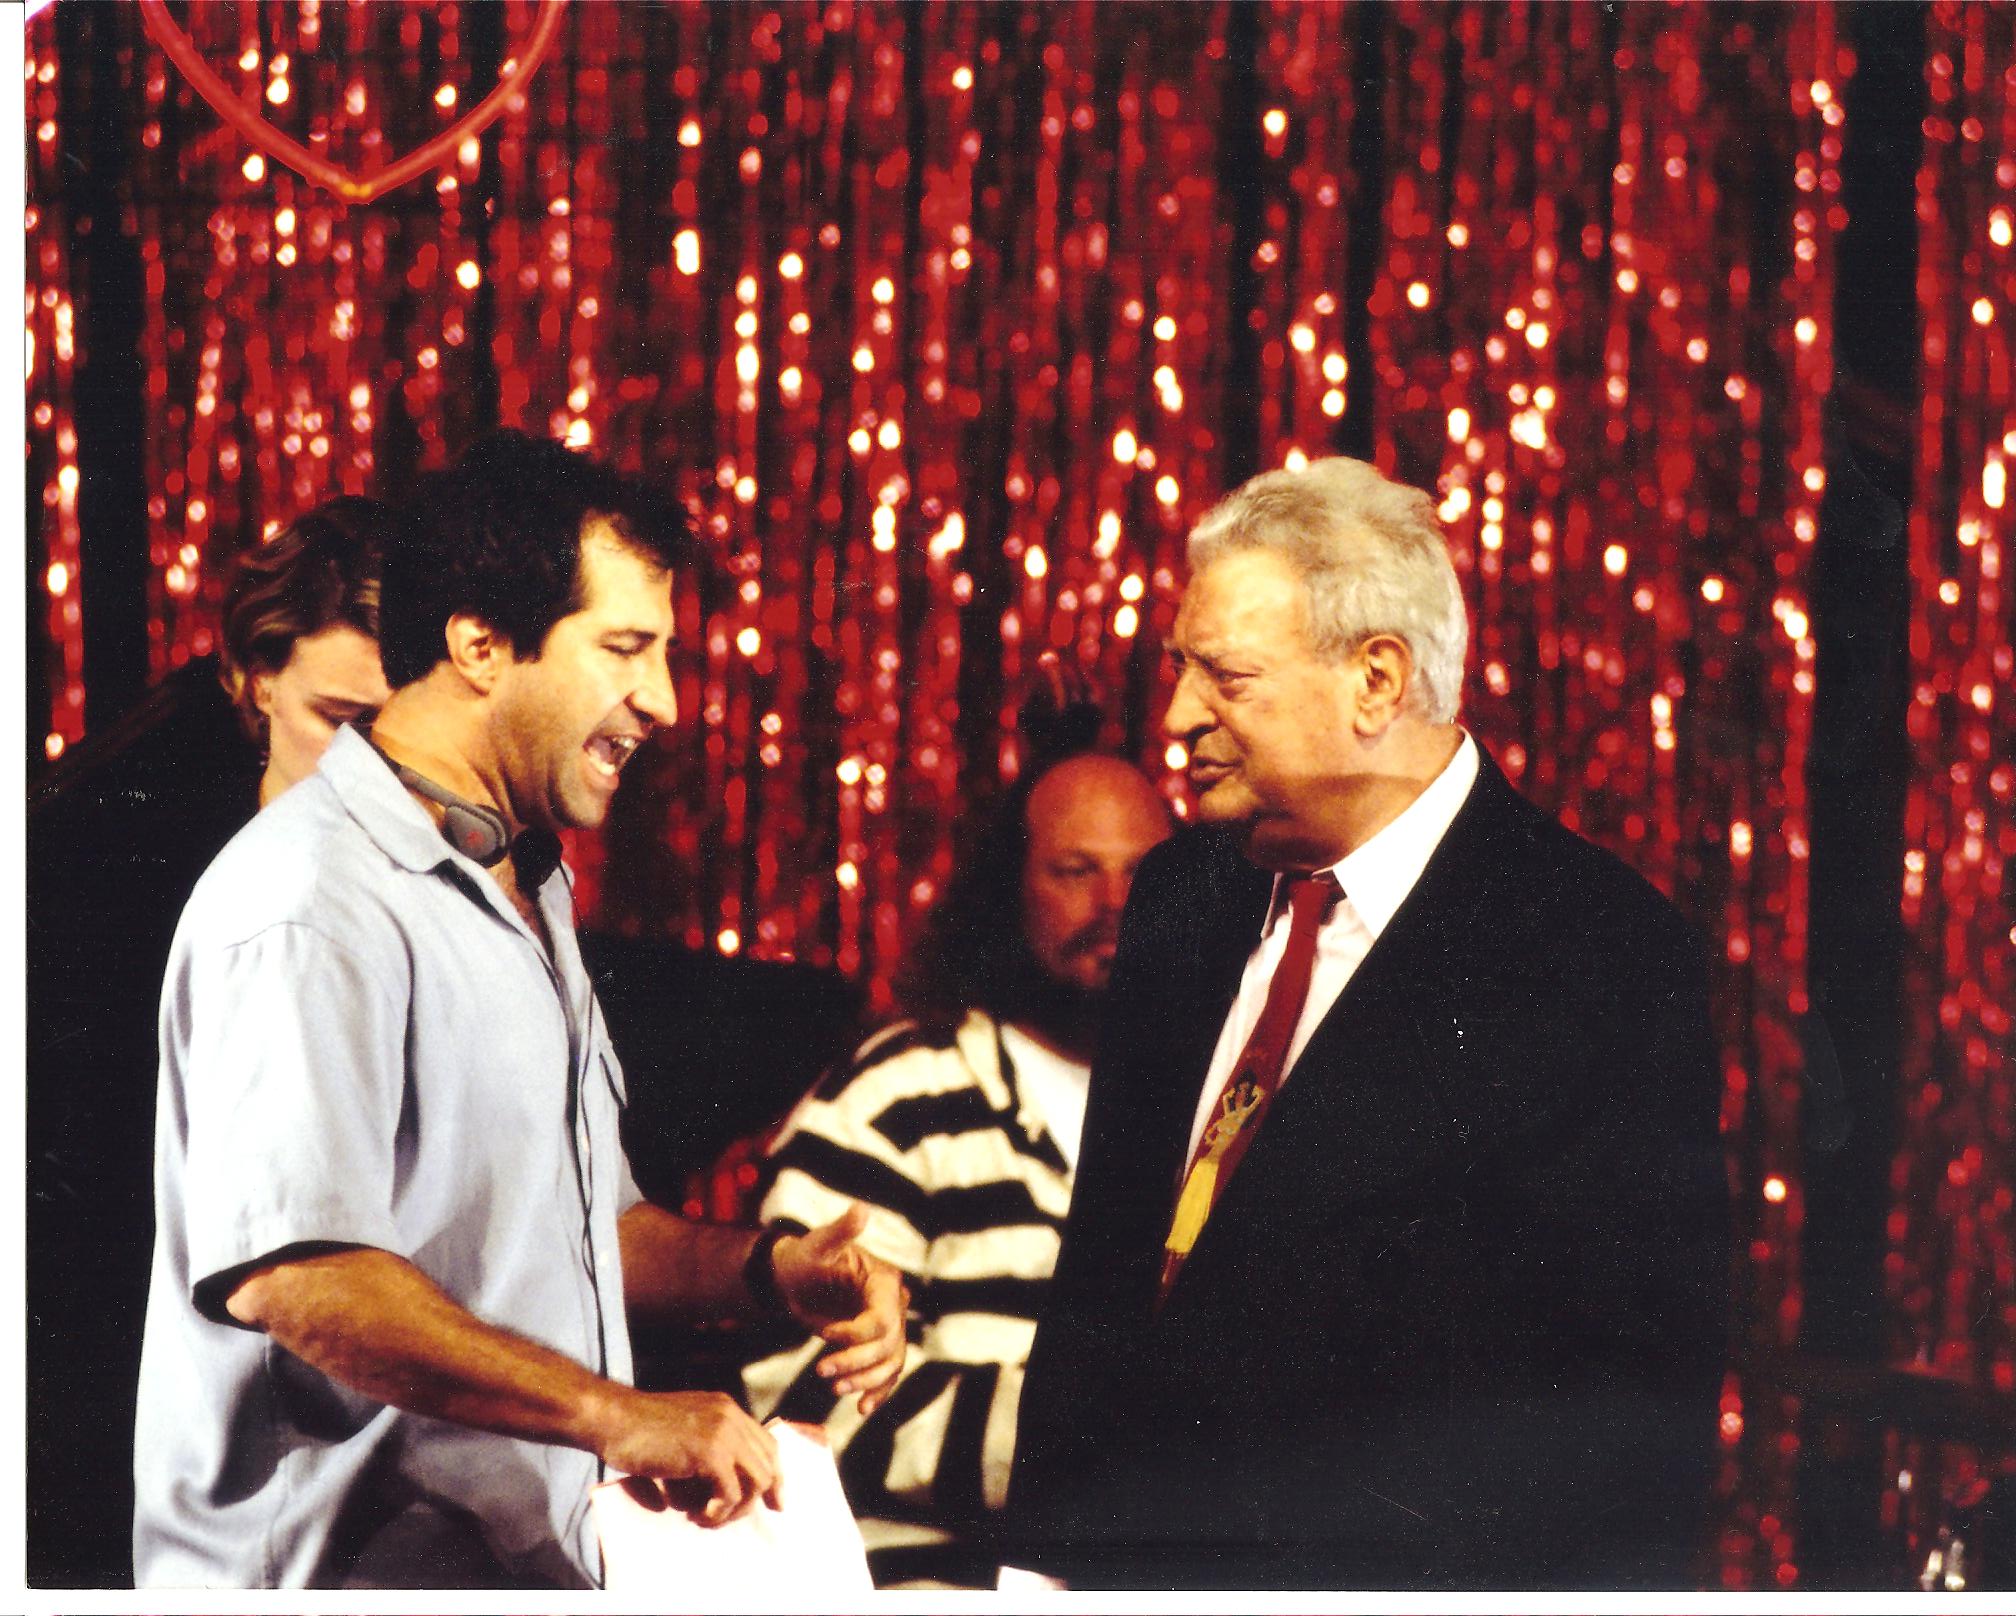 Harry Basil directing Rodney Dangerfield in Back By Midnigh